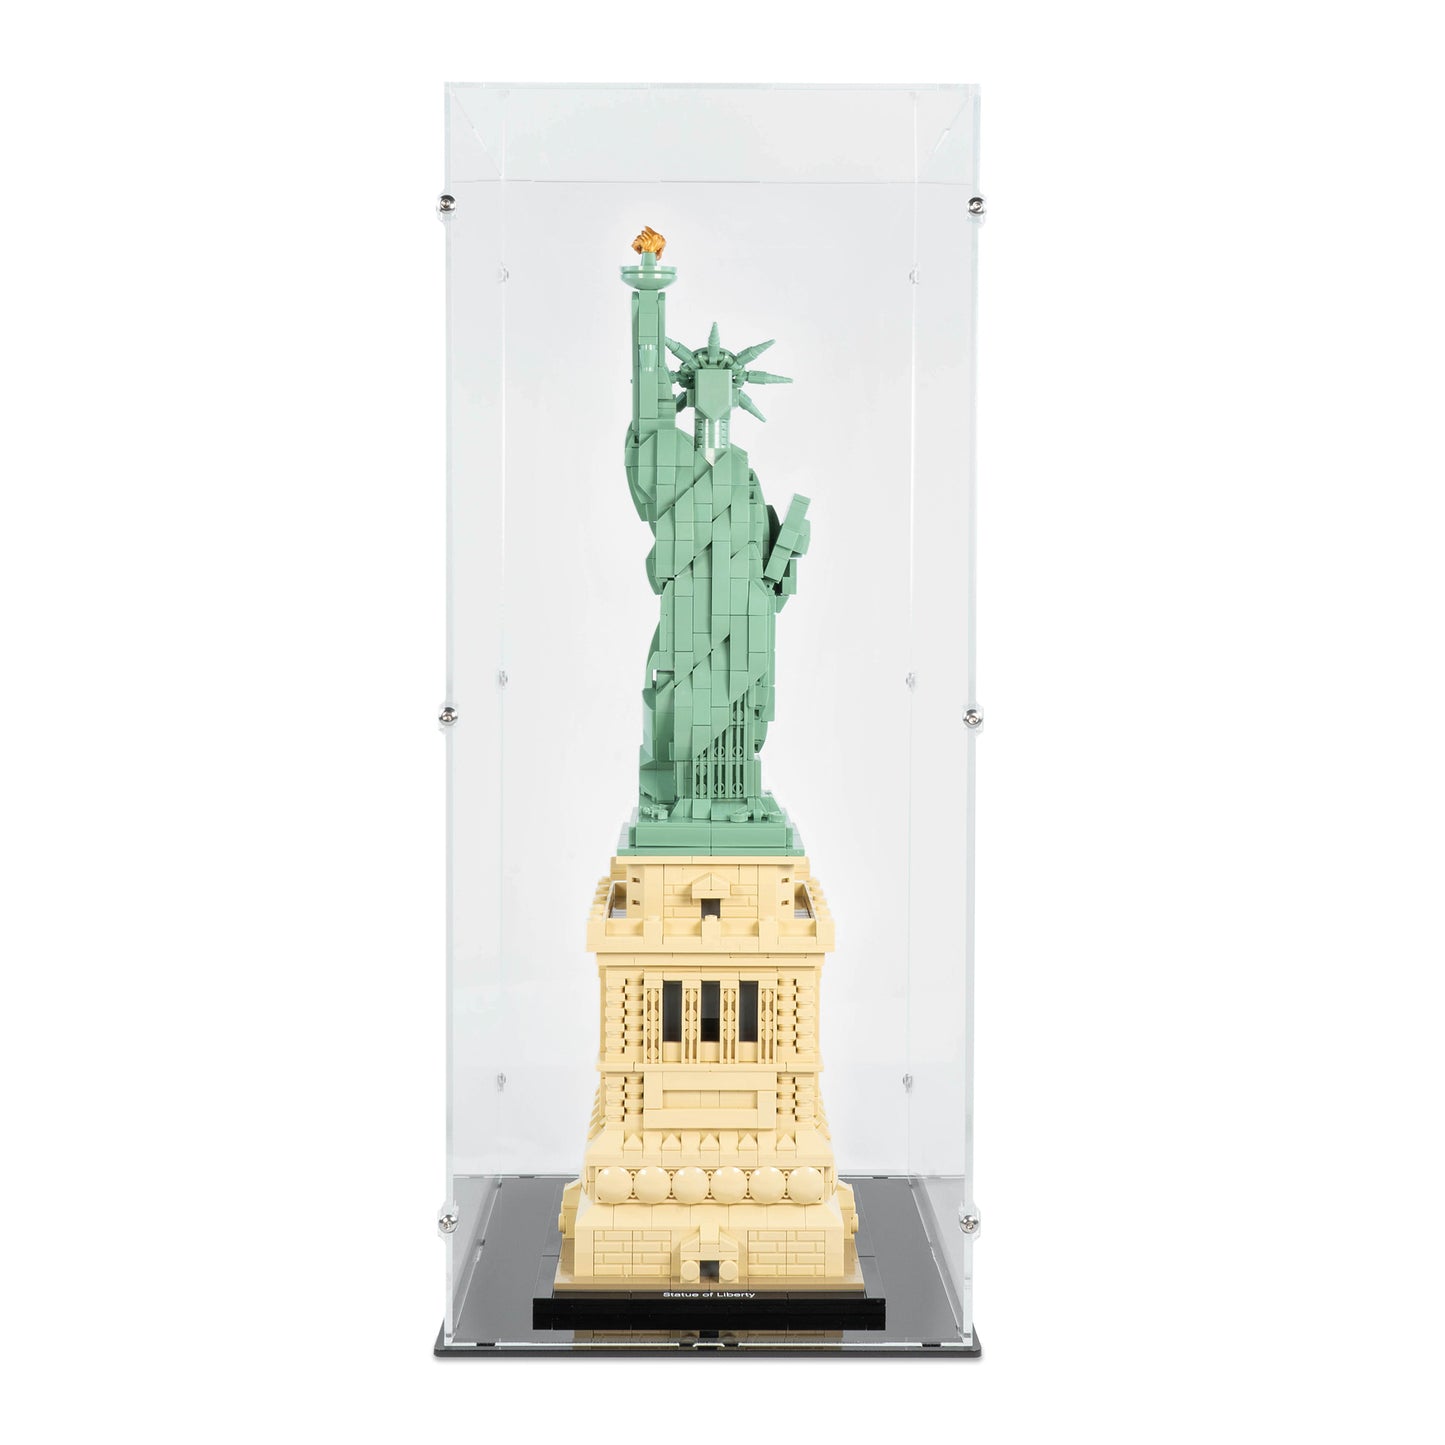 Front view of LEGO 21042 Statue of Liberty Display Case.